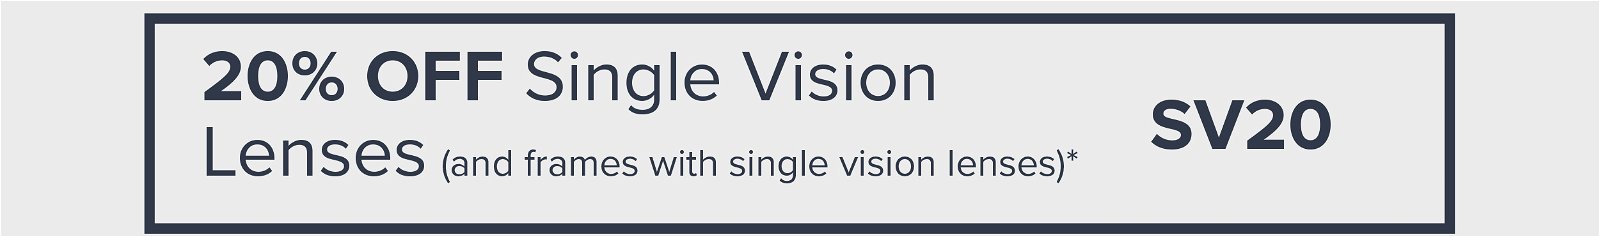 20% off single vision lenses (and frames with single vision lenses)* use Code SV20 at checkout.